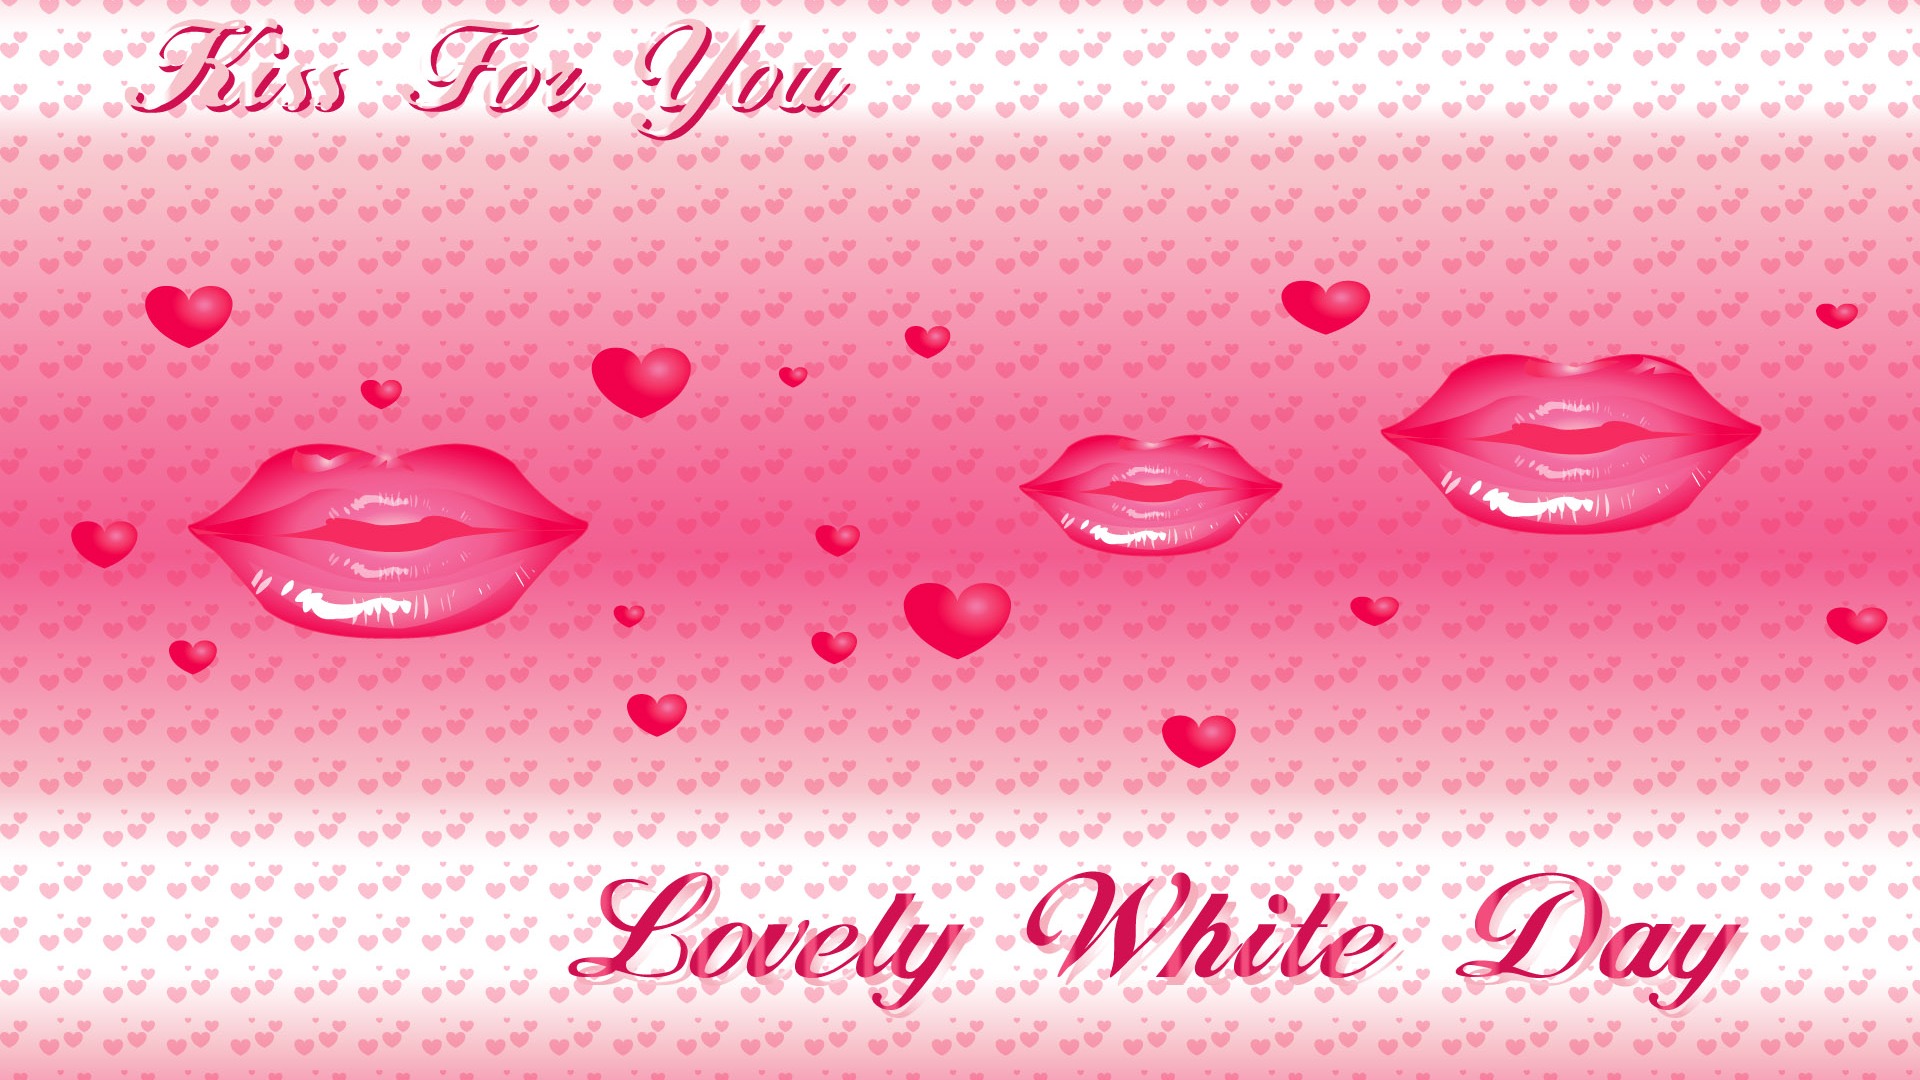 Valentine's Day Theme Wallpapers (1) #4 - 1920x1080